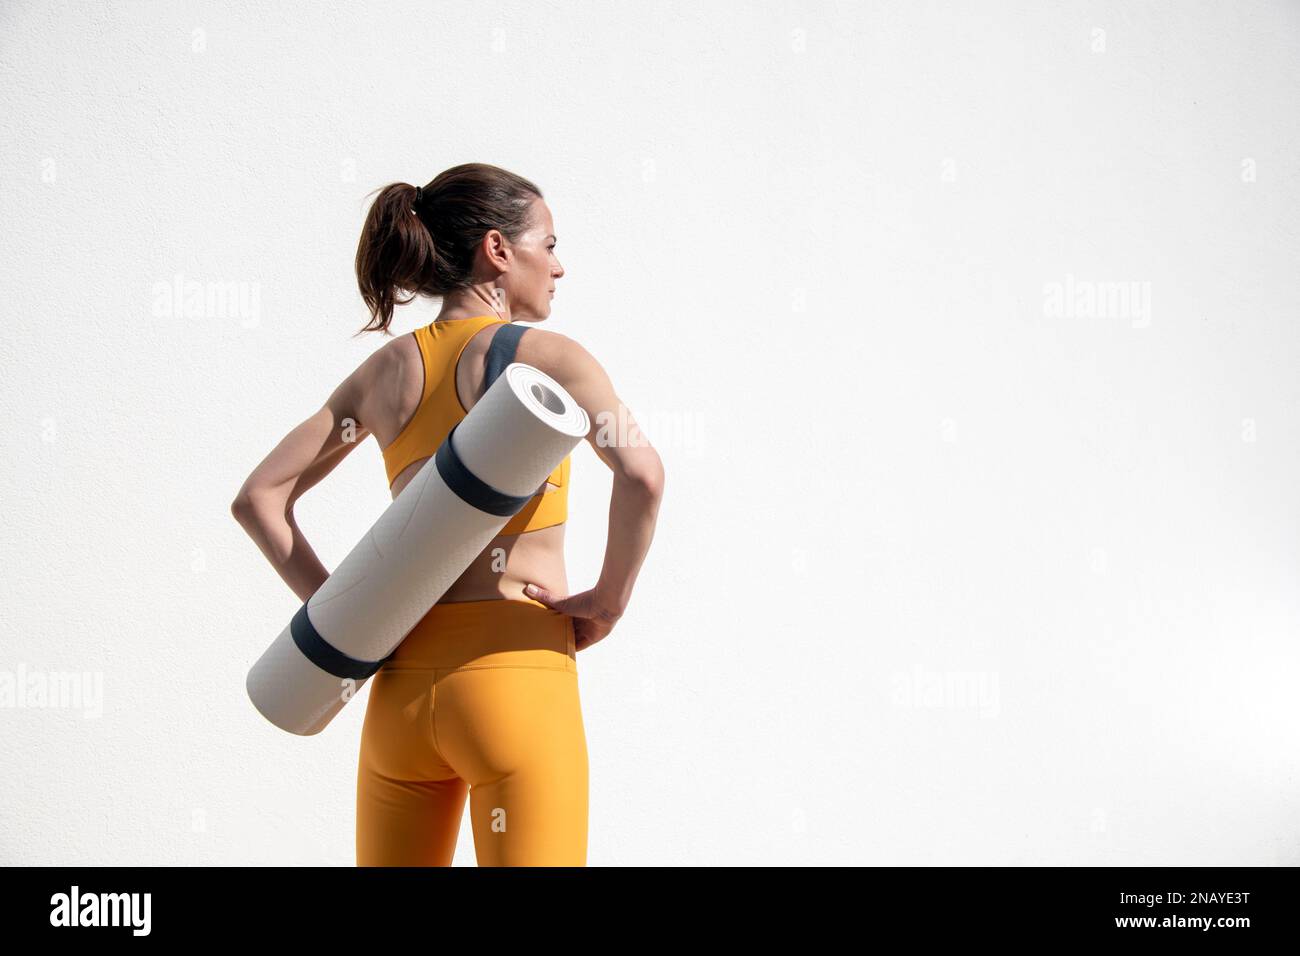 Sporty female carrying a yoga, exercise mat, outside by a white wall. Stock Photo